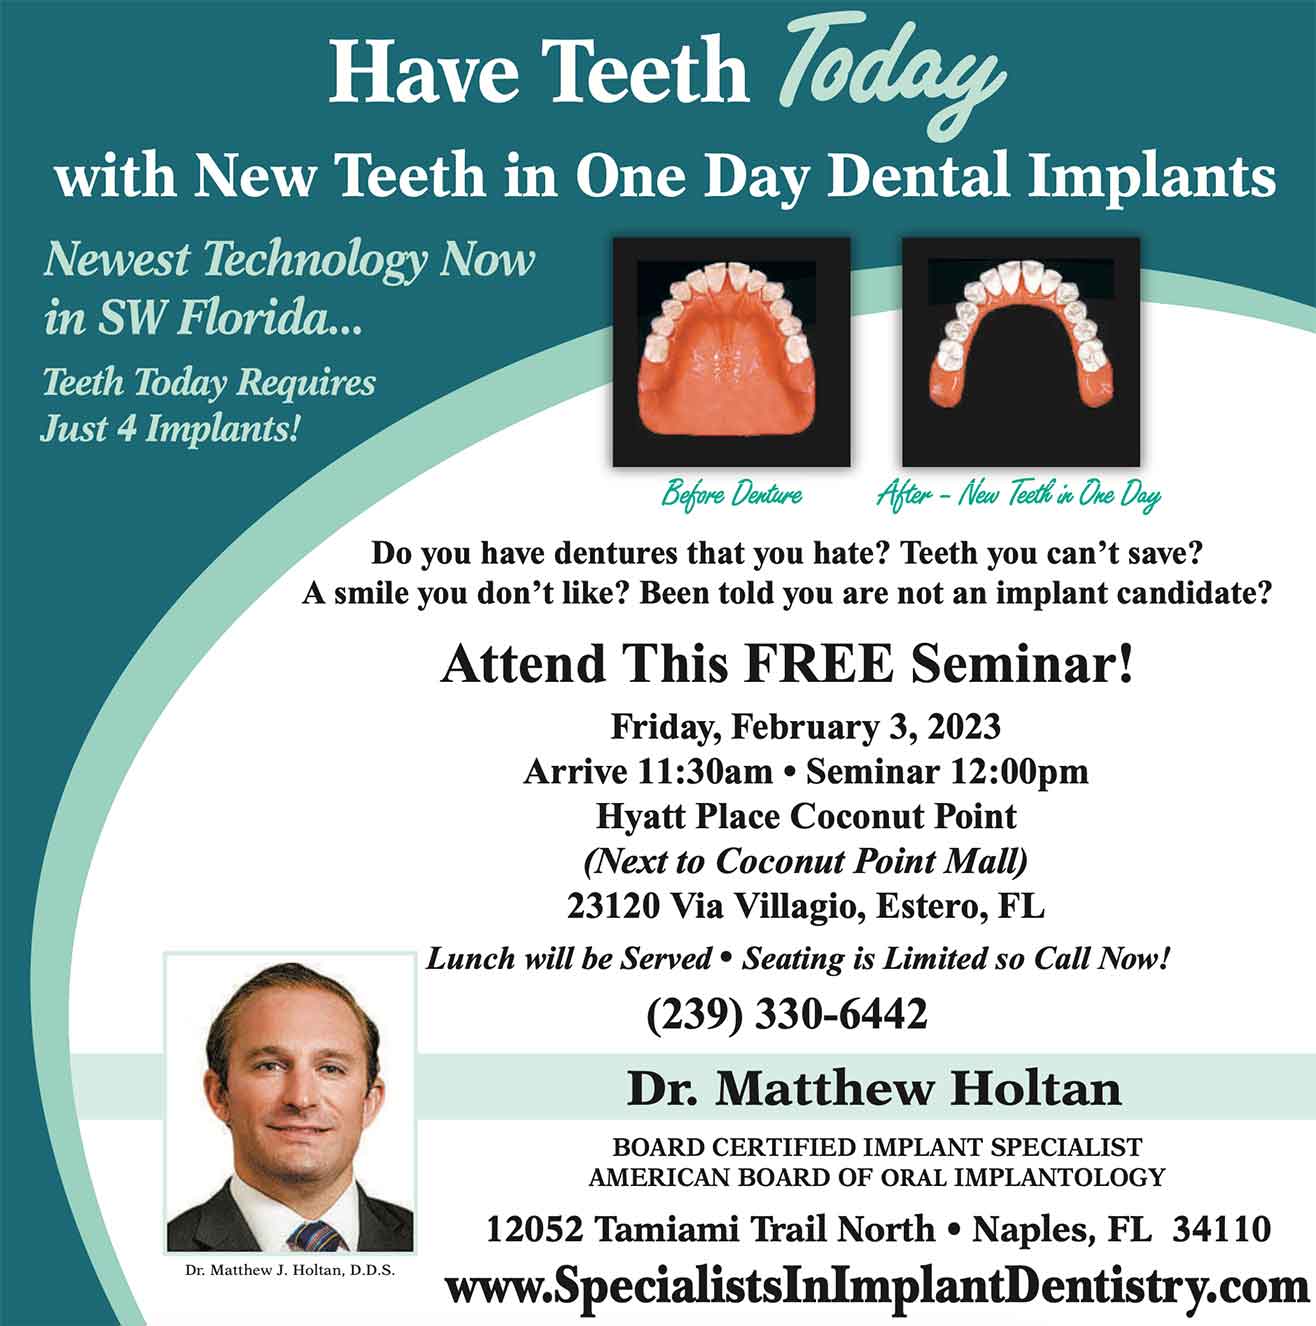 February 3rd, 2023 Seminar by Dr. Matthew J. Holtan One Day Dental Implants from a Board Certified Implant Specialist